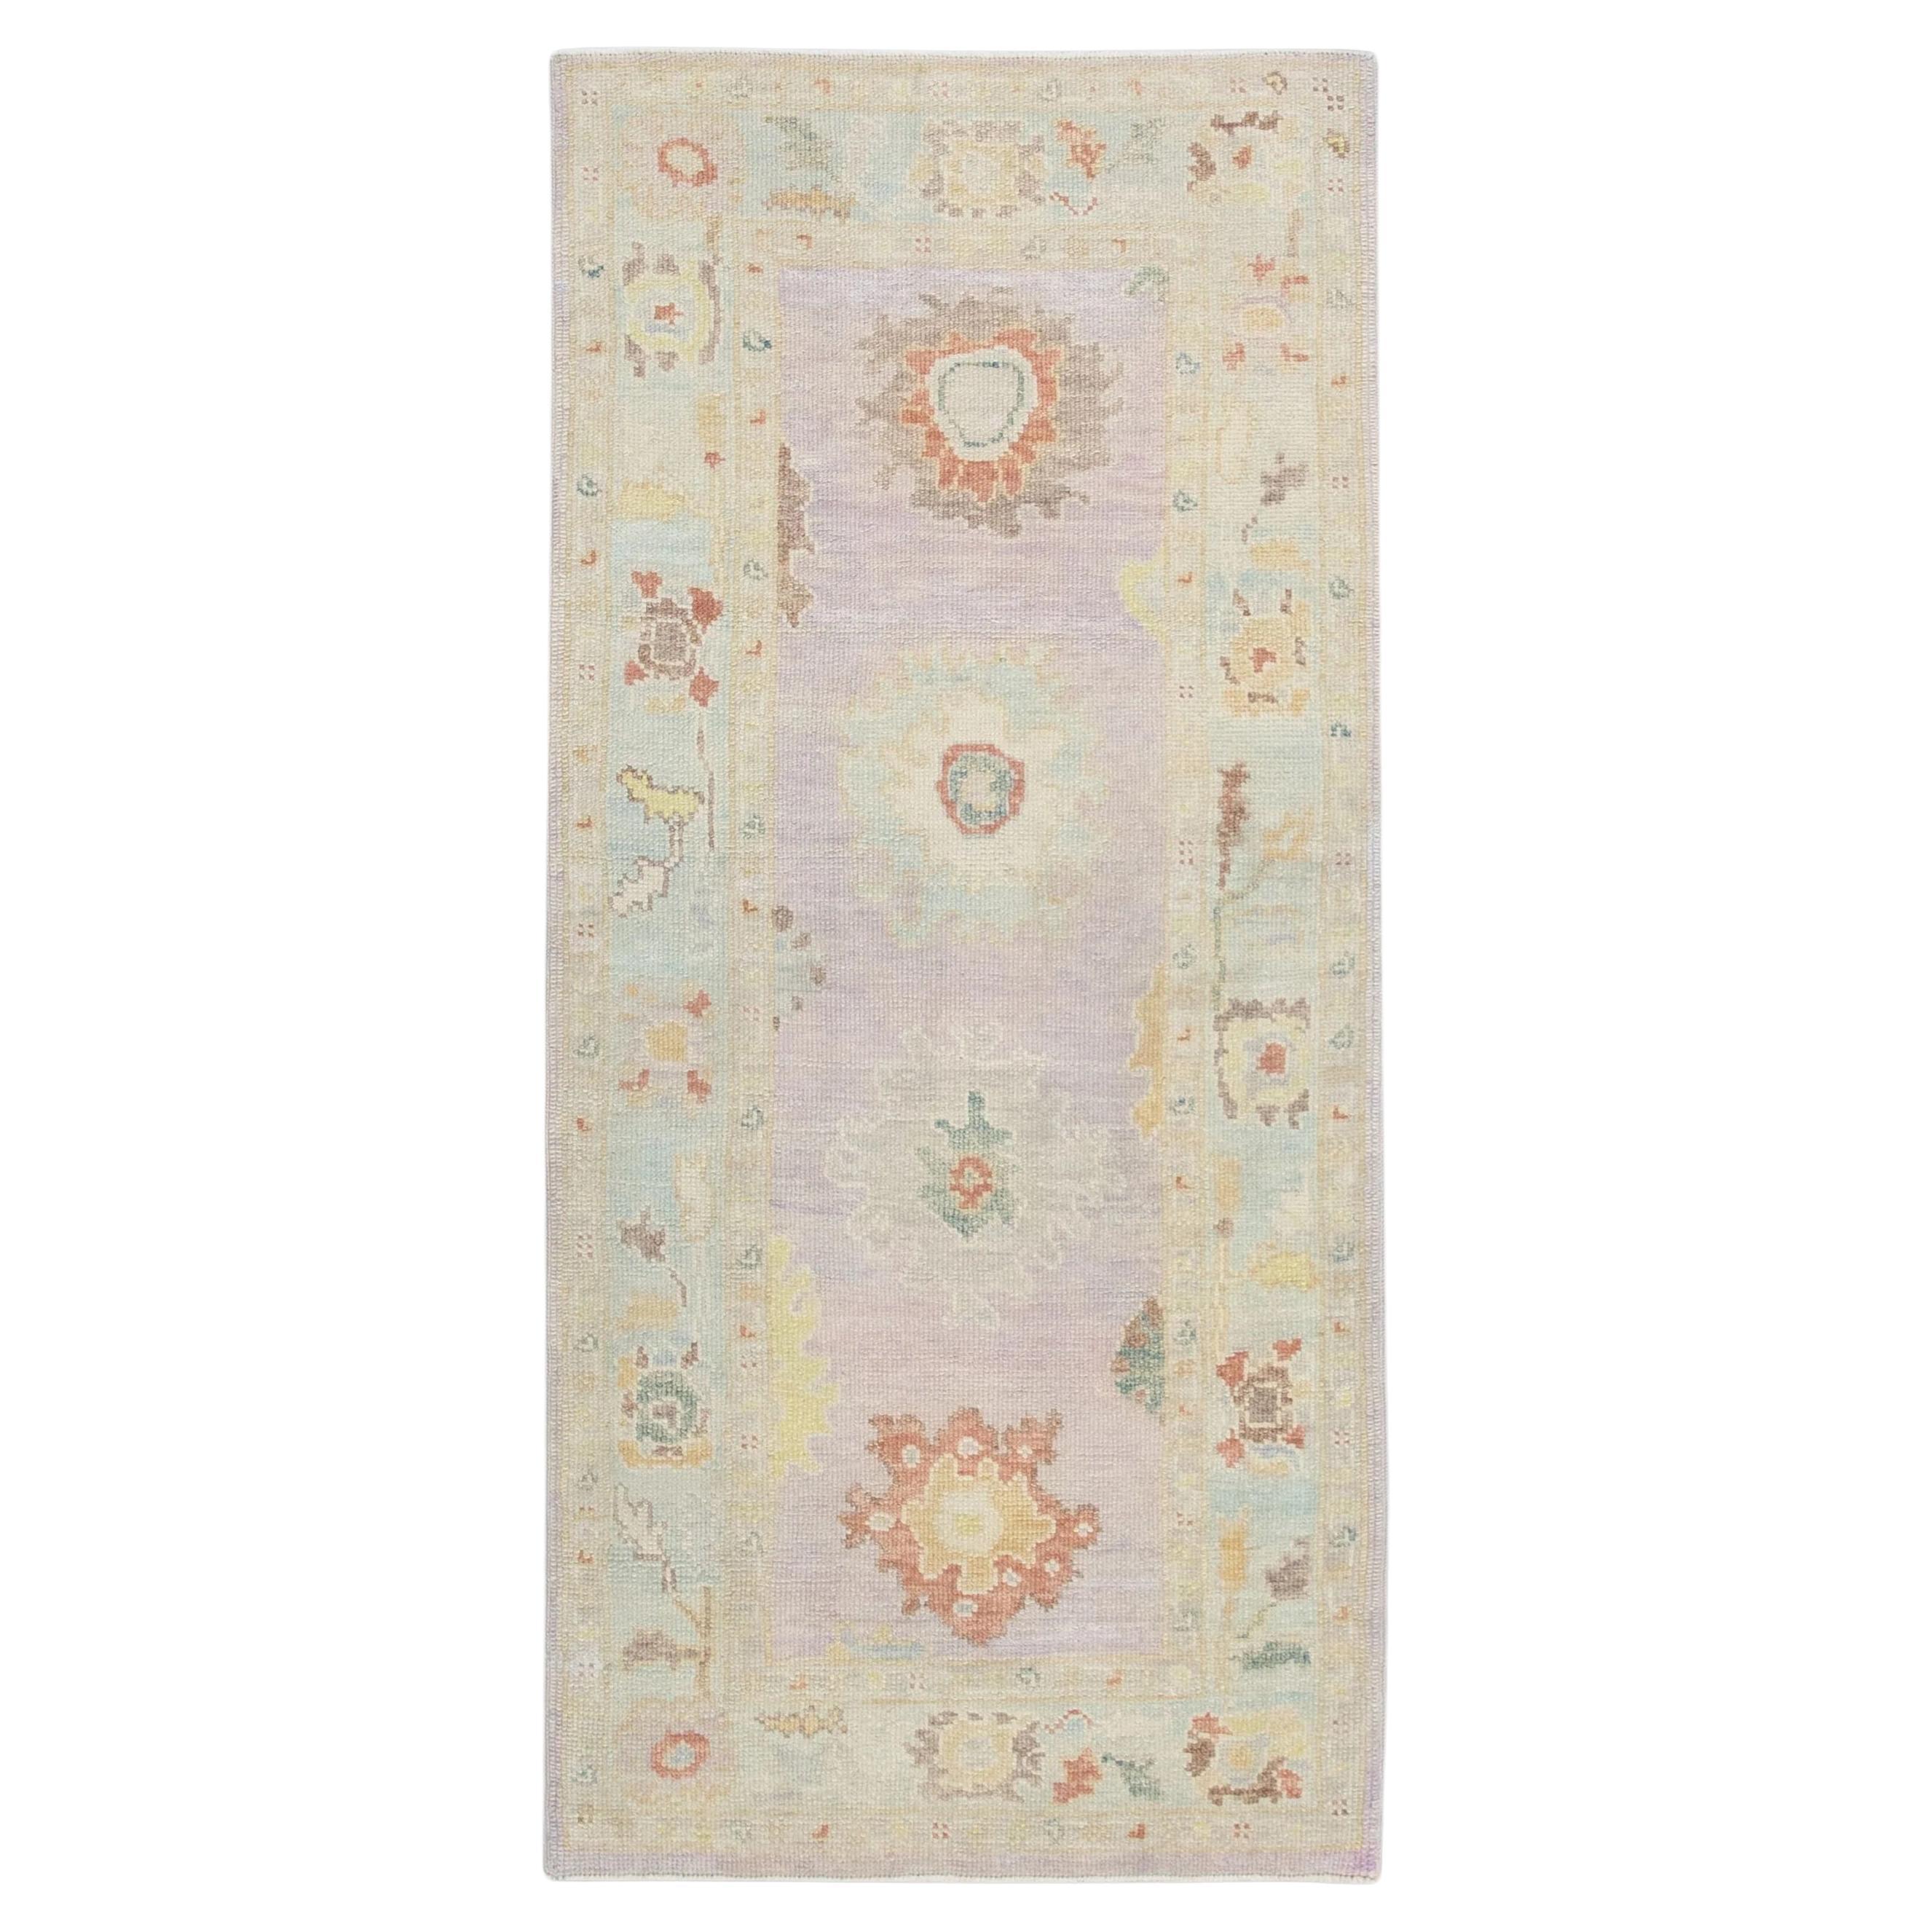 Floral Handwoven Wool Turkish Oushak Rug with Soft Lavender Design 3'2" x 6'8" For Sale